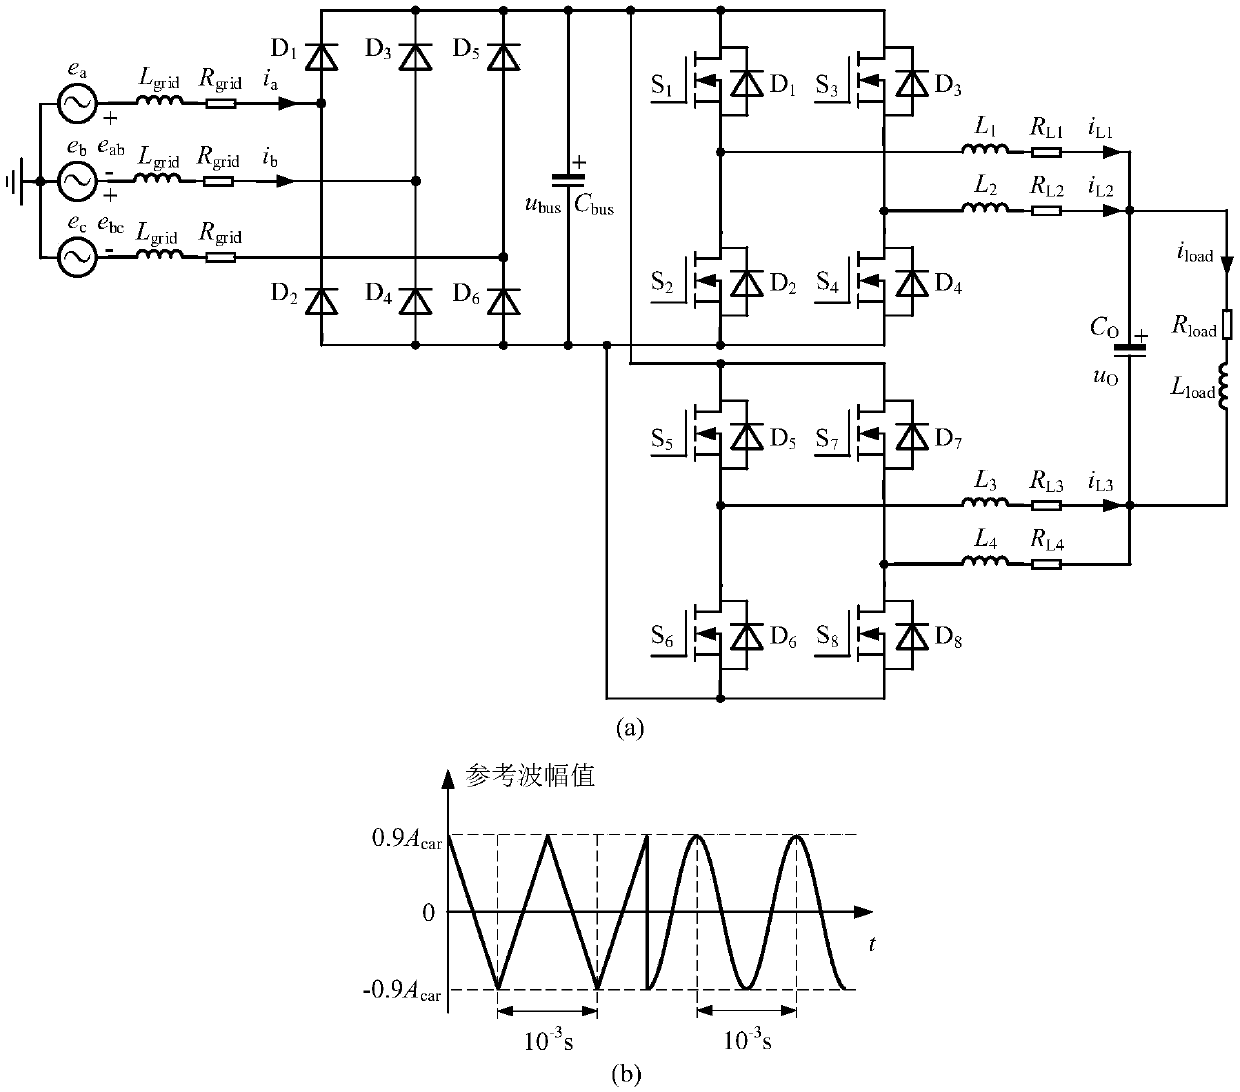 Discrete state event-driven simulation method for power electronic hybrid system simulation